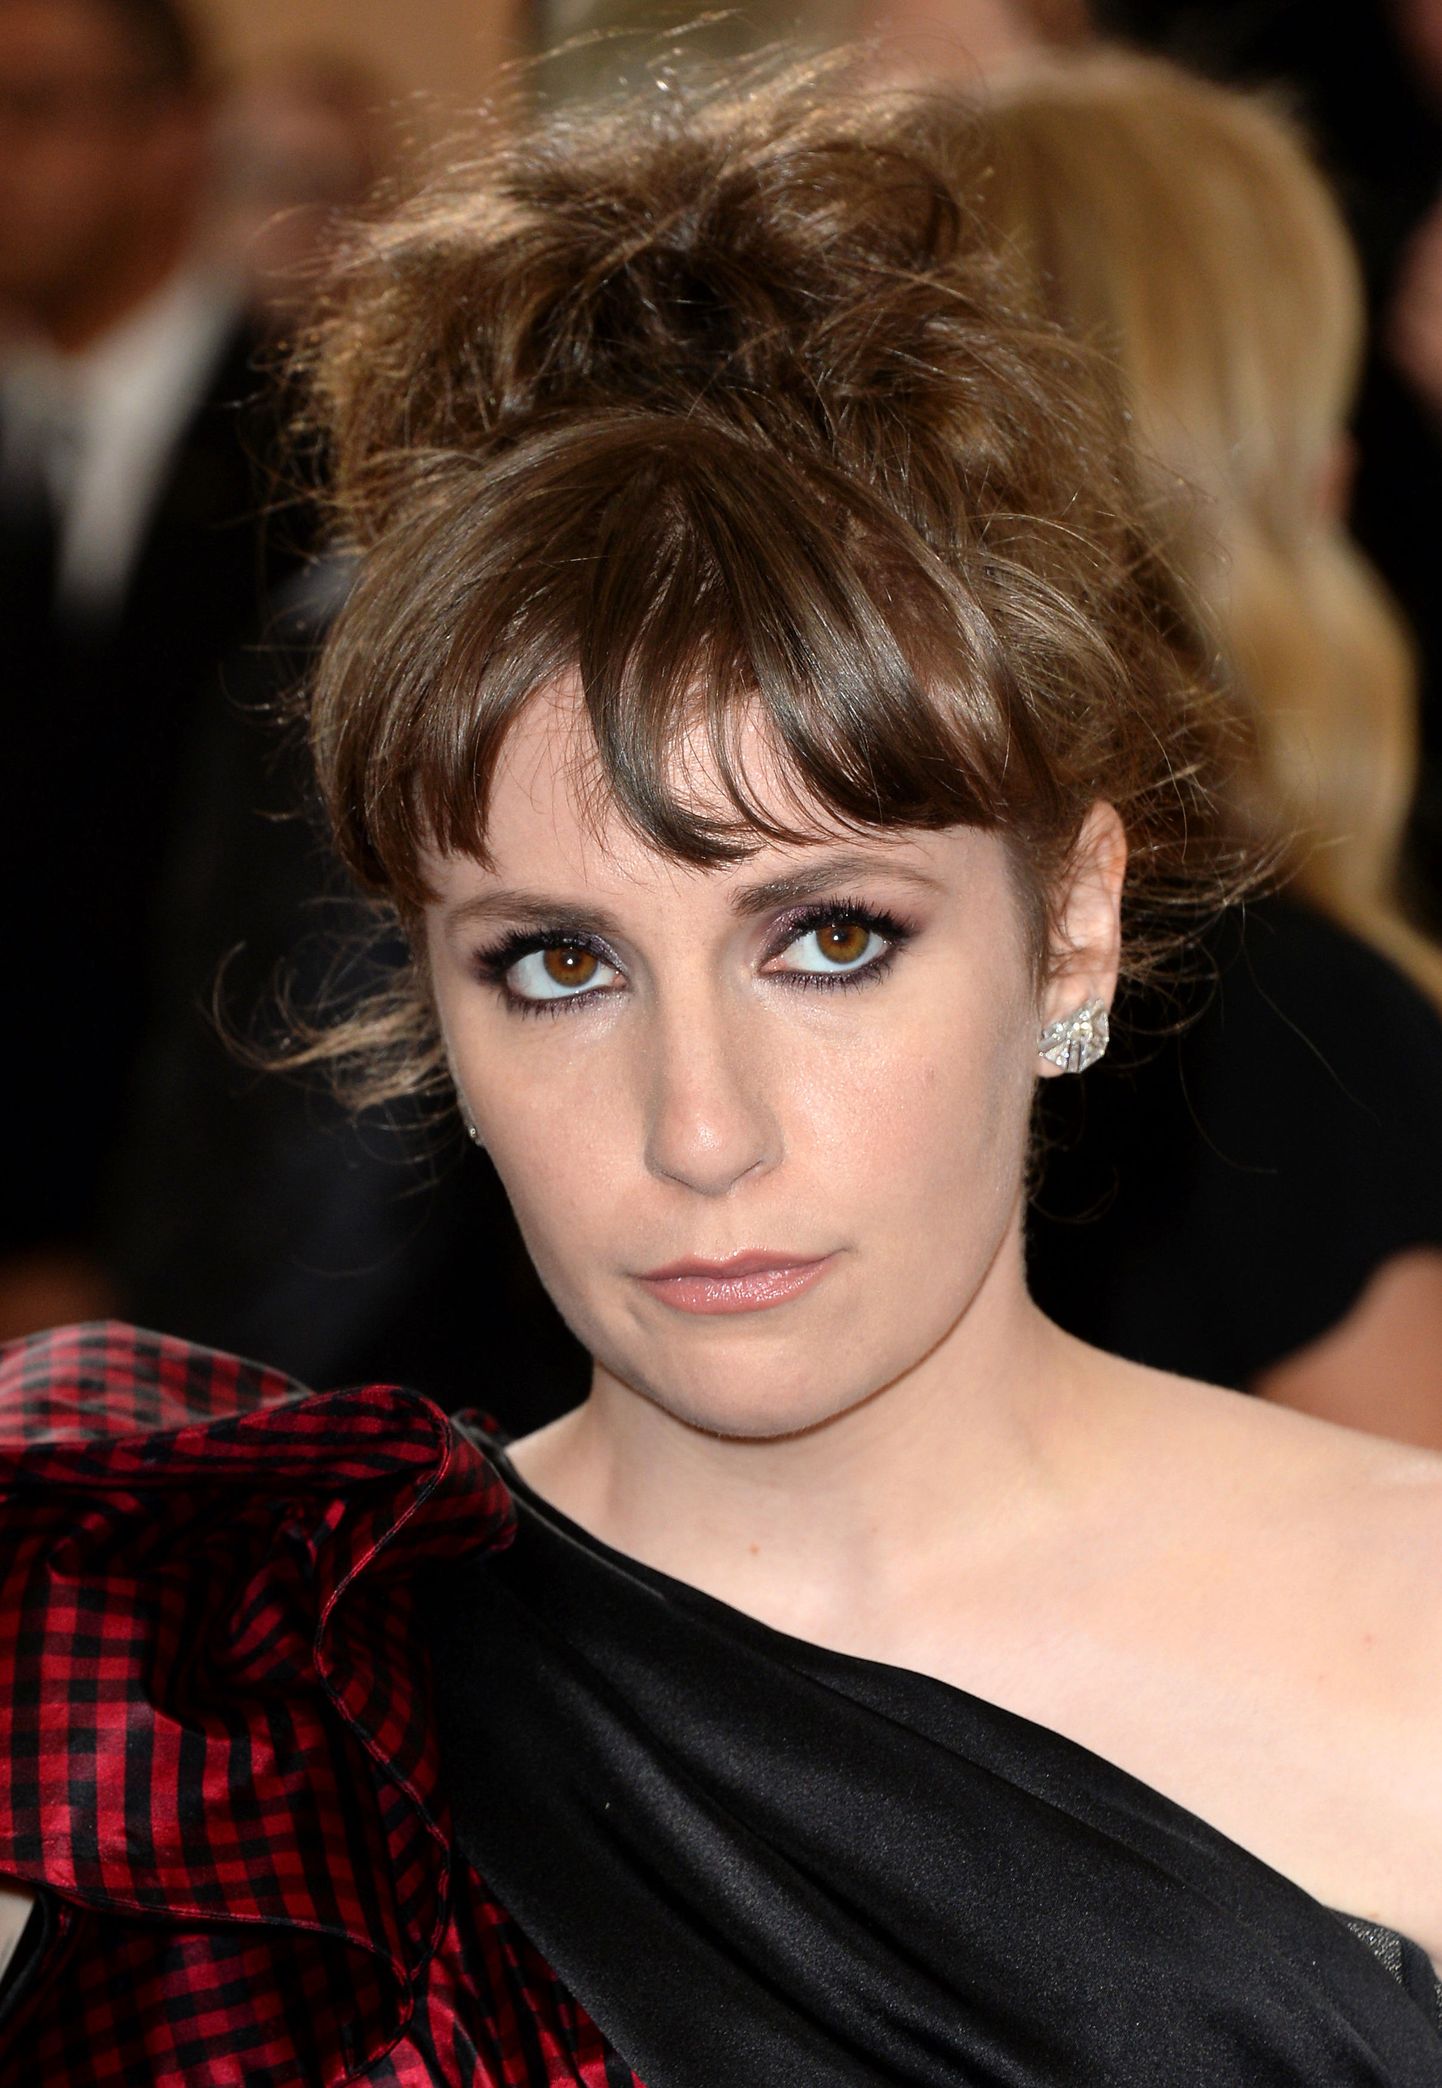 File photo dated 1/5/2017 of actress Lena Dunham who has revealed that she underwent a total hysterectomy after years of suffering pain caused by endometriosis.